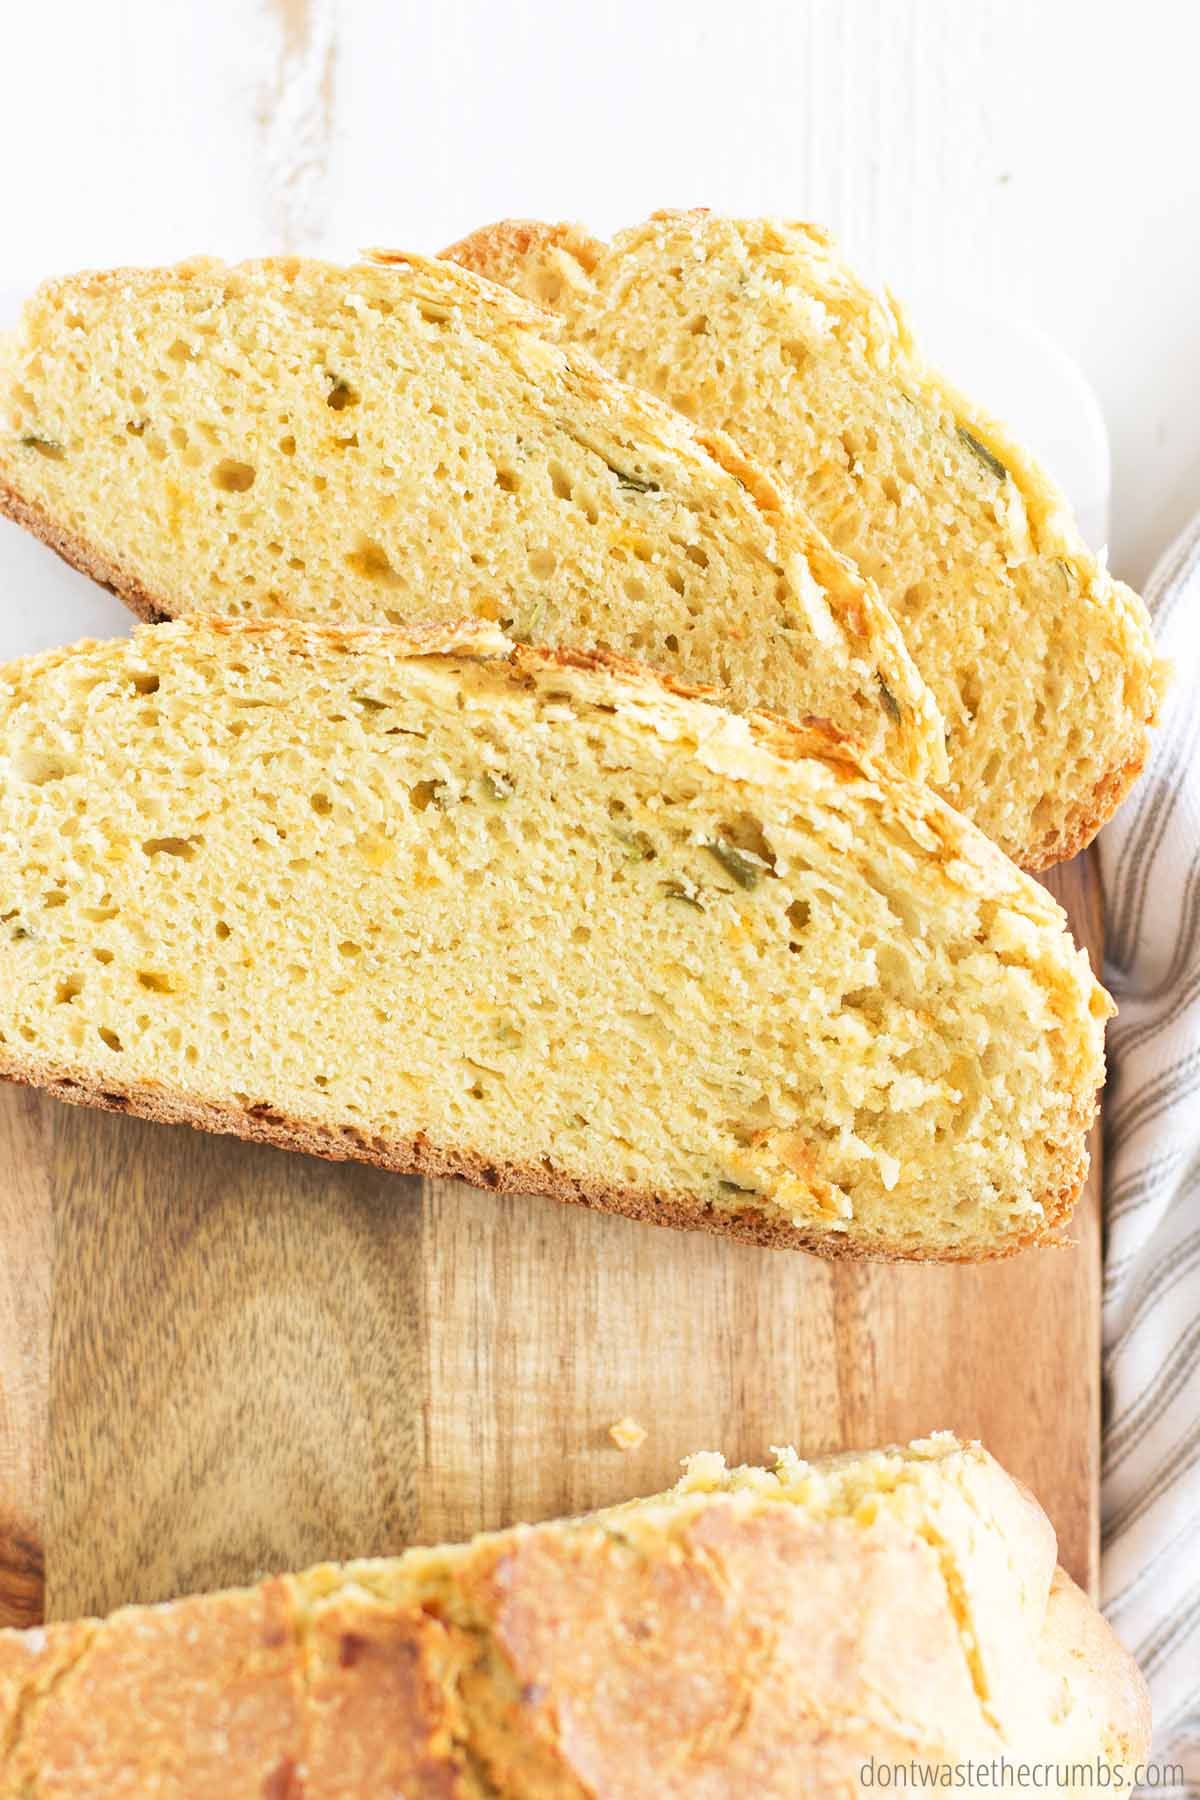 Sliced jalapeno cheese bread on a cutting board, ready to be enjoyed with soup or as a sandwich.